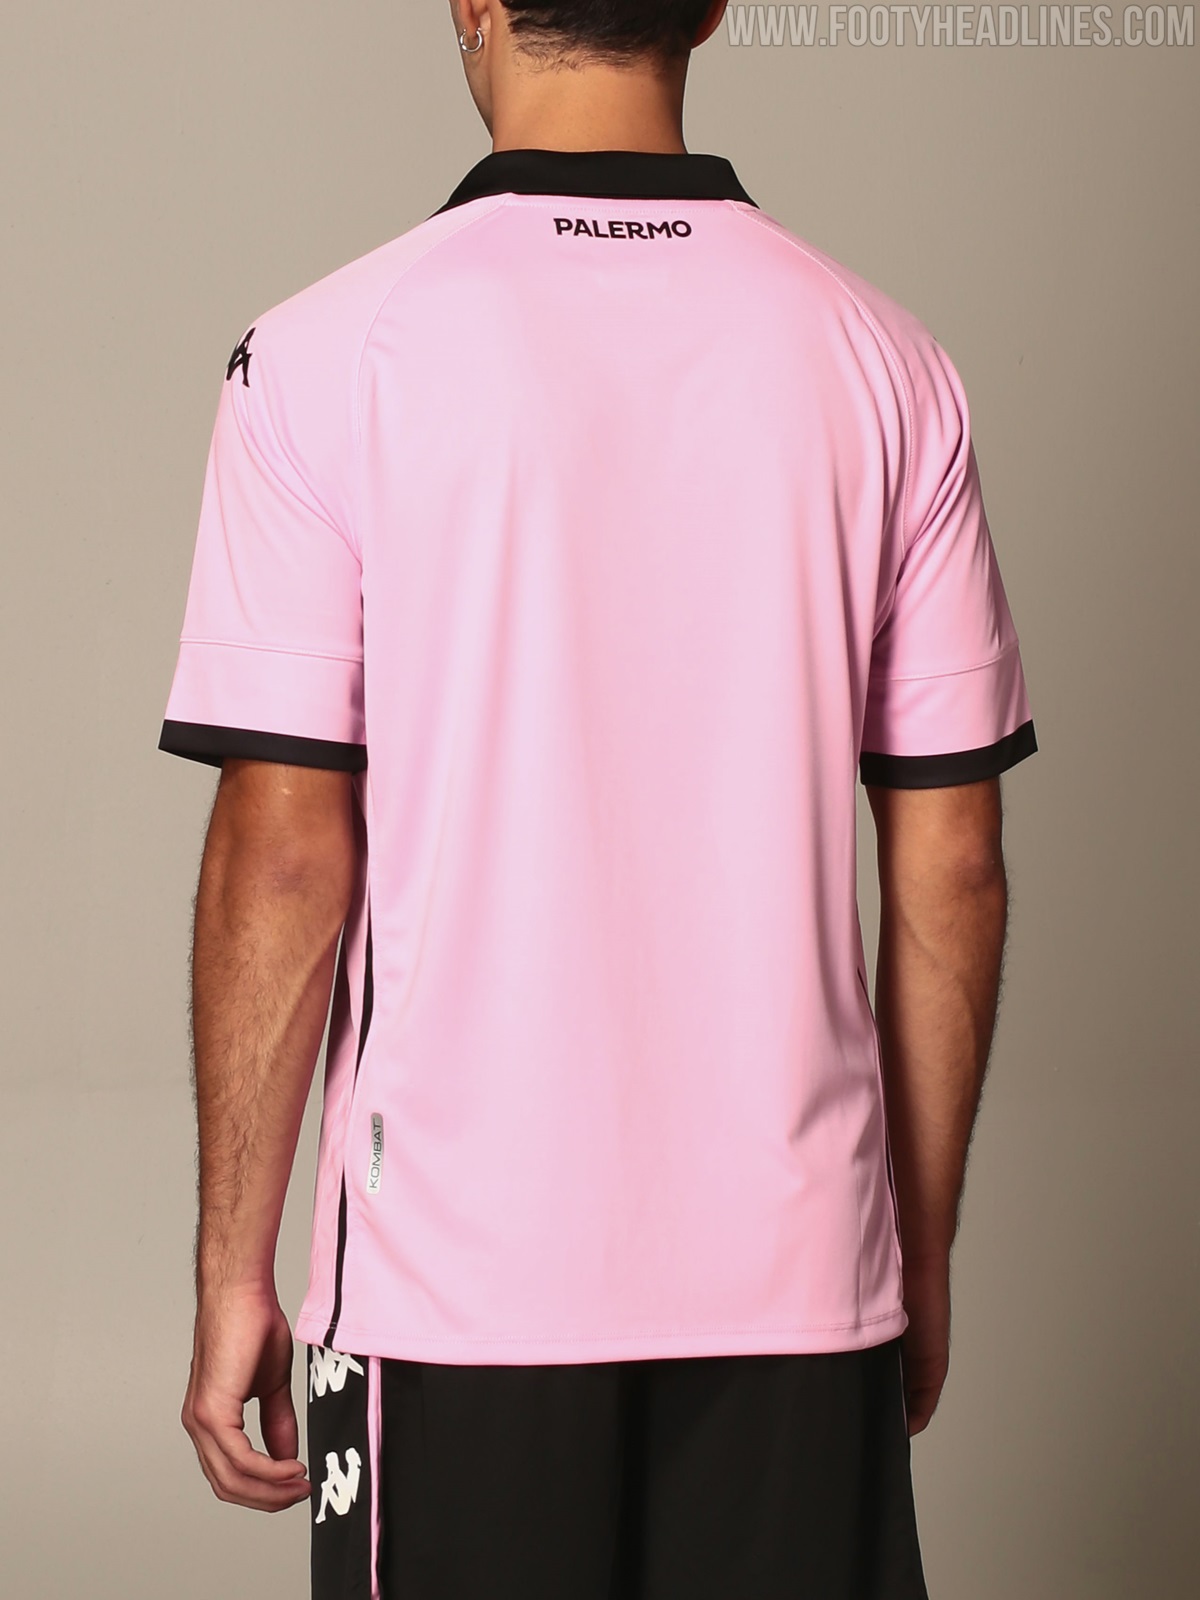 Palermo 21-22 Fourth Kit Released - Footy Headlines